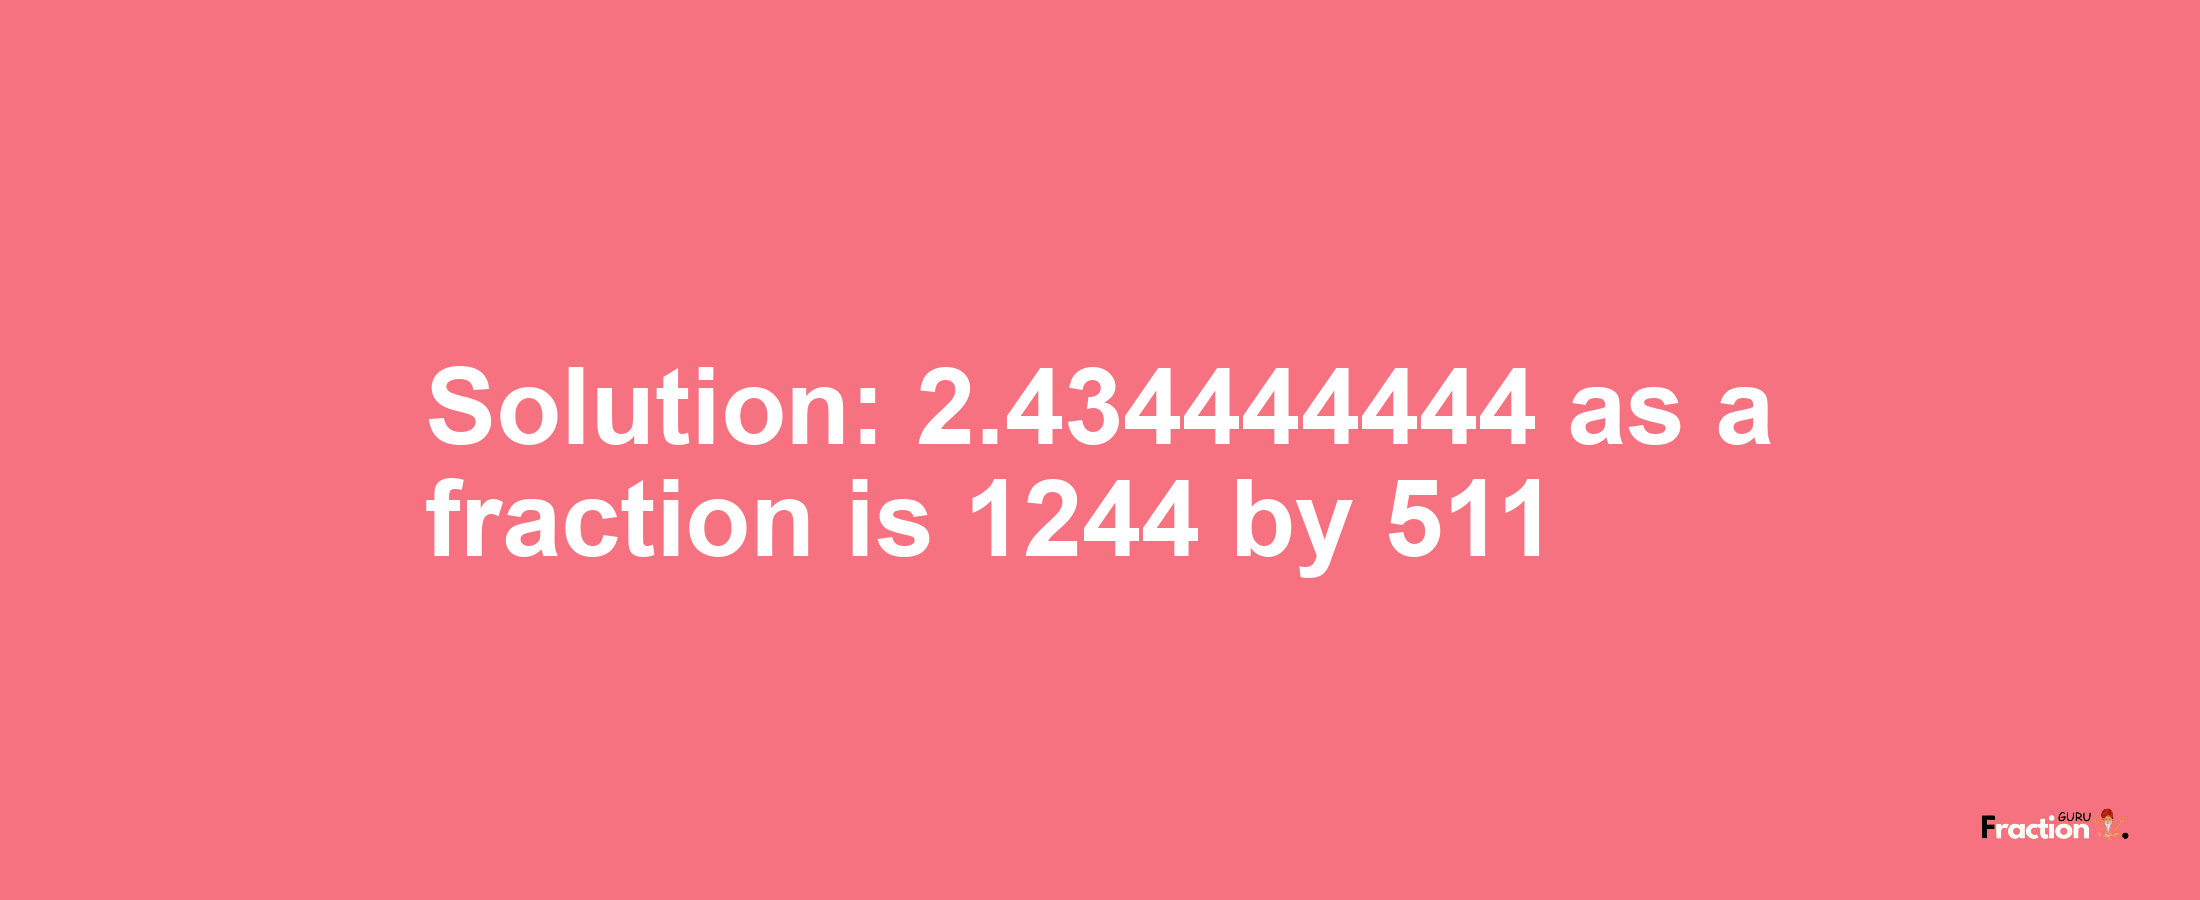 Solution:2.434444444 as a fraction is 1244/511